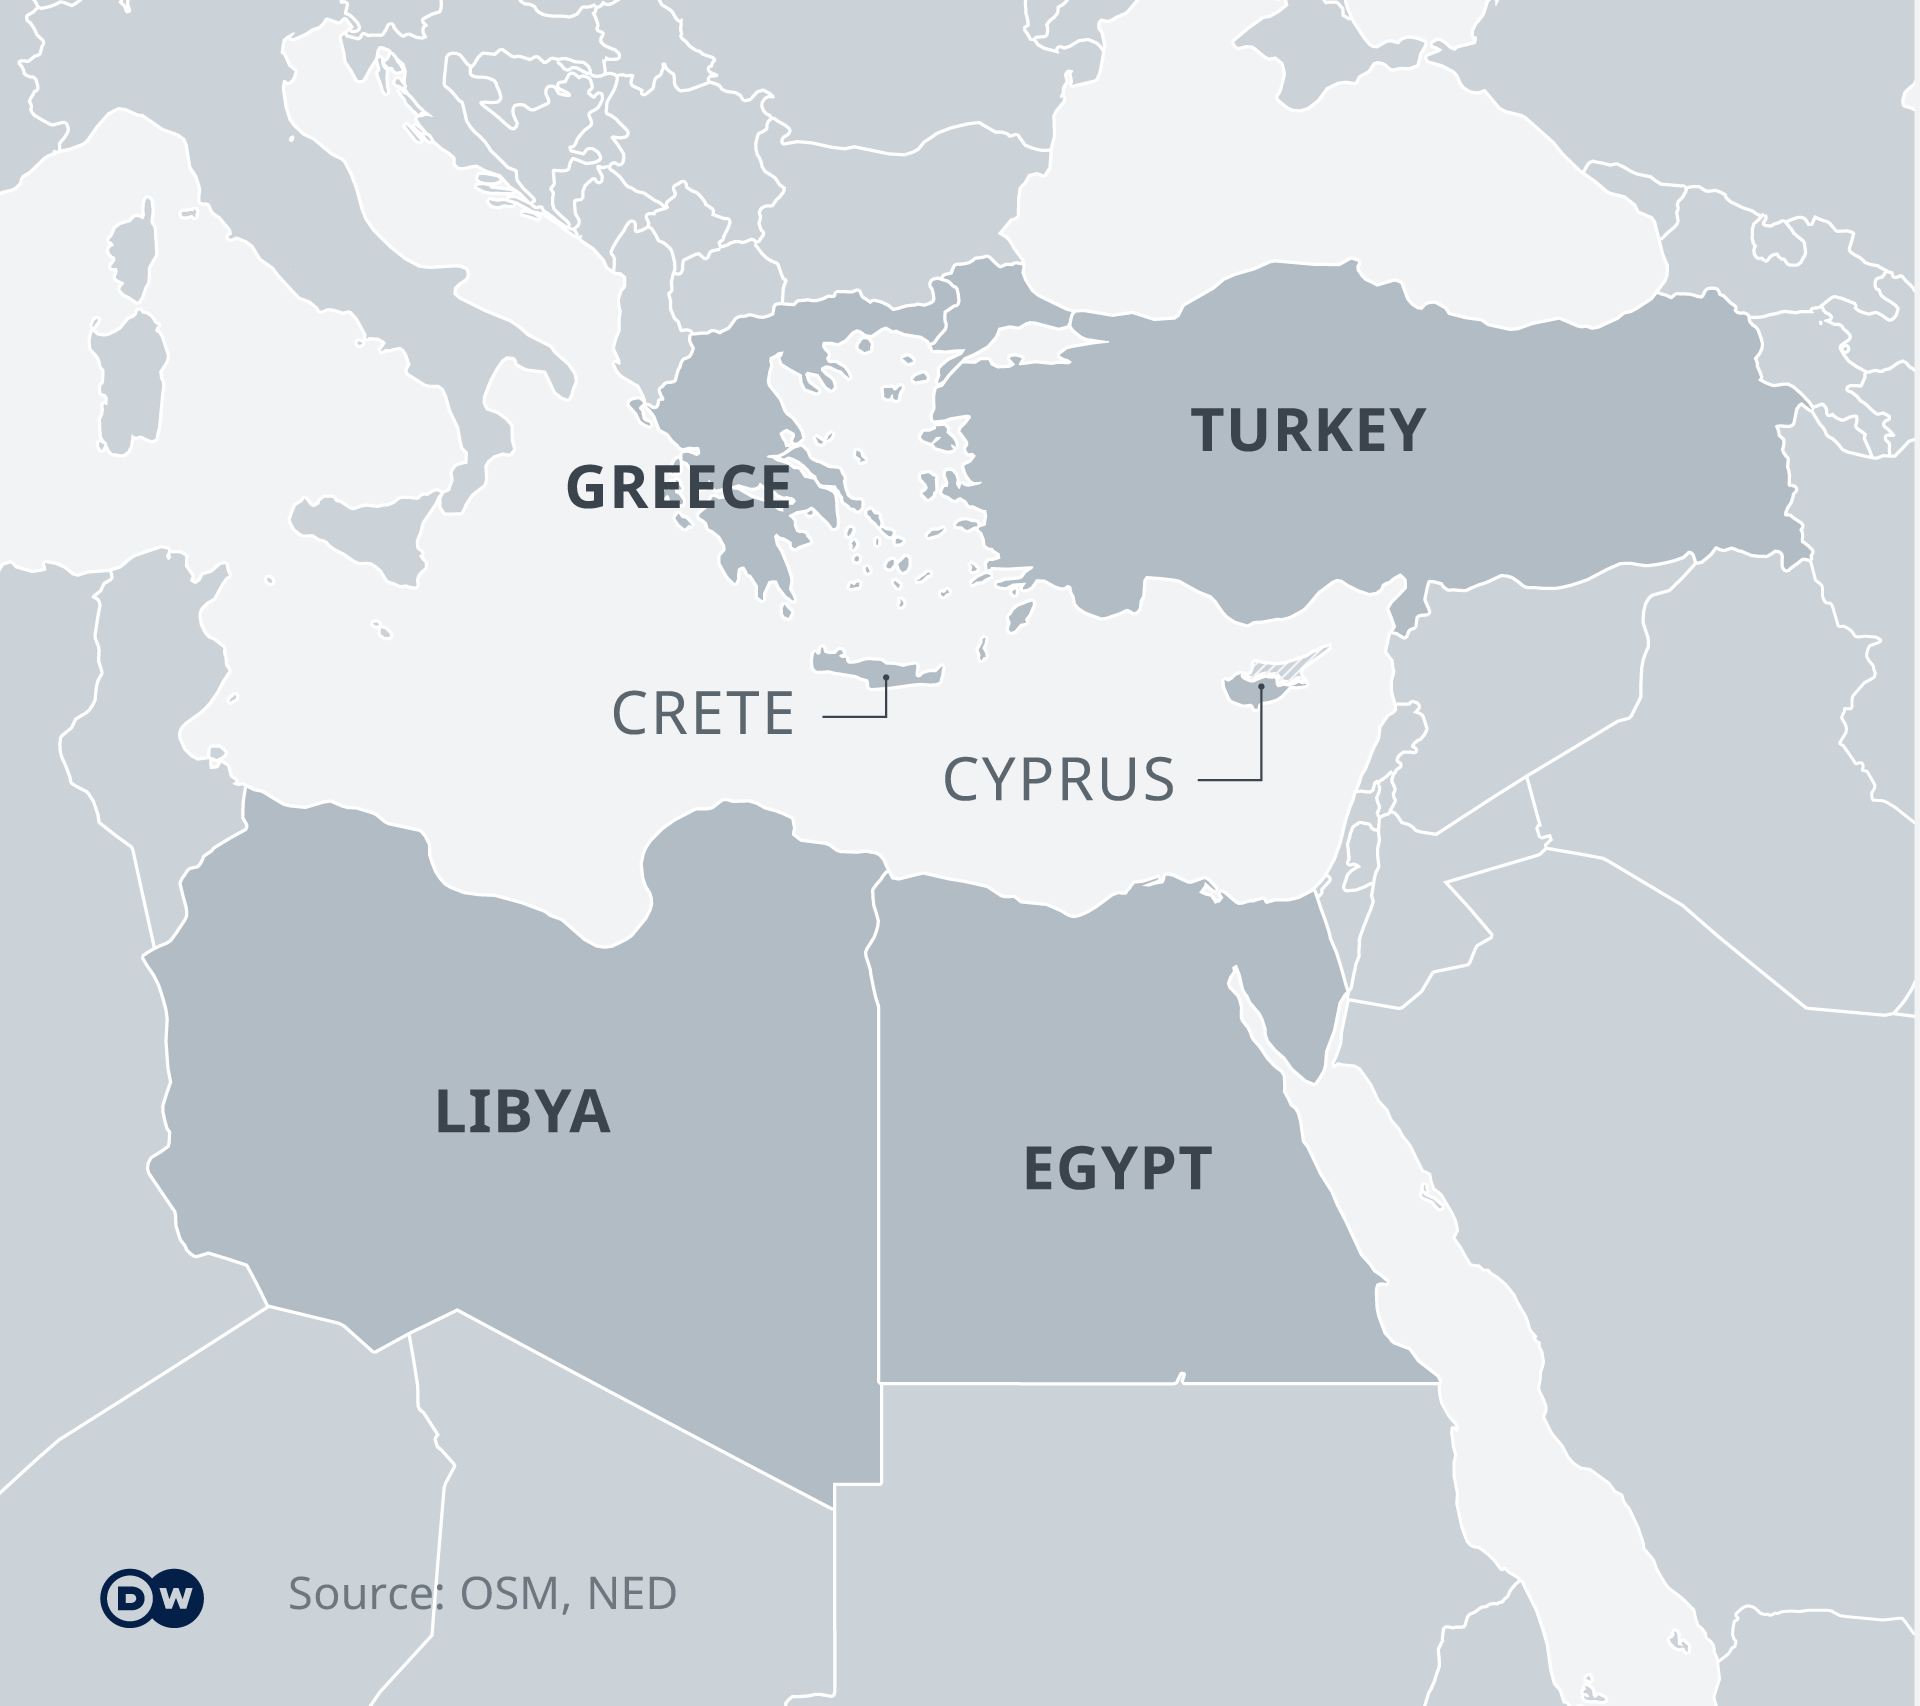 Turkey Libya Maritime Deal Triggers Mediterranean Tensions Middle East News And Analysis Of Events In The Arab World Dw 29 11 2019